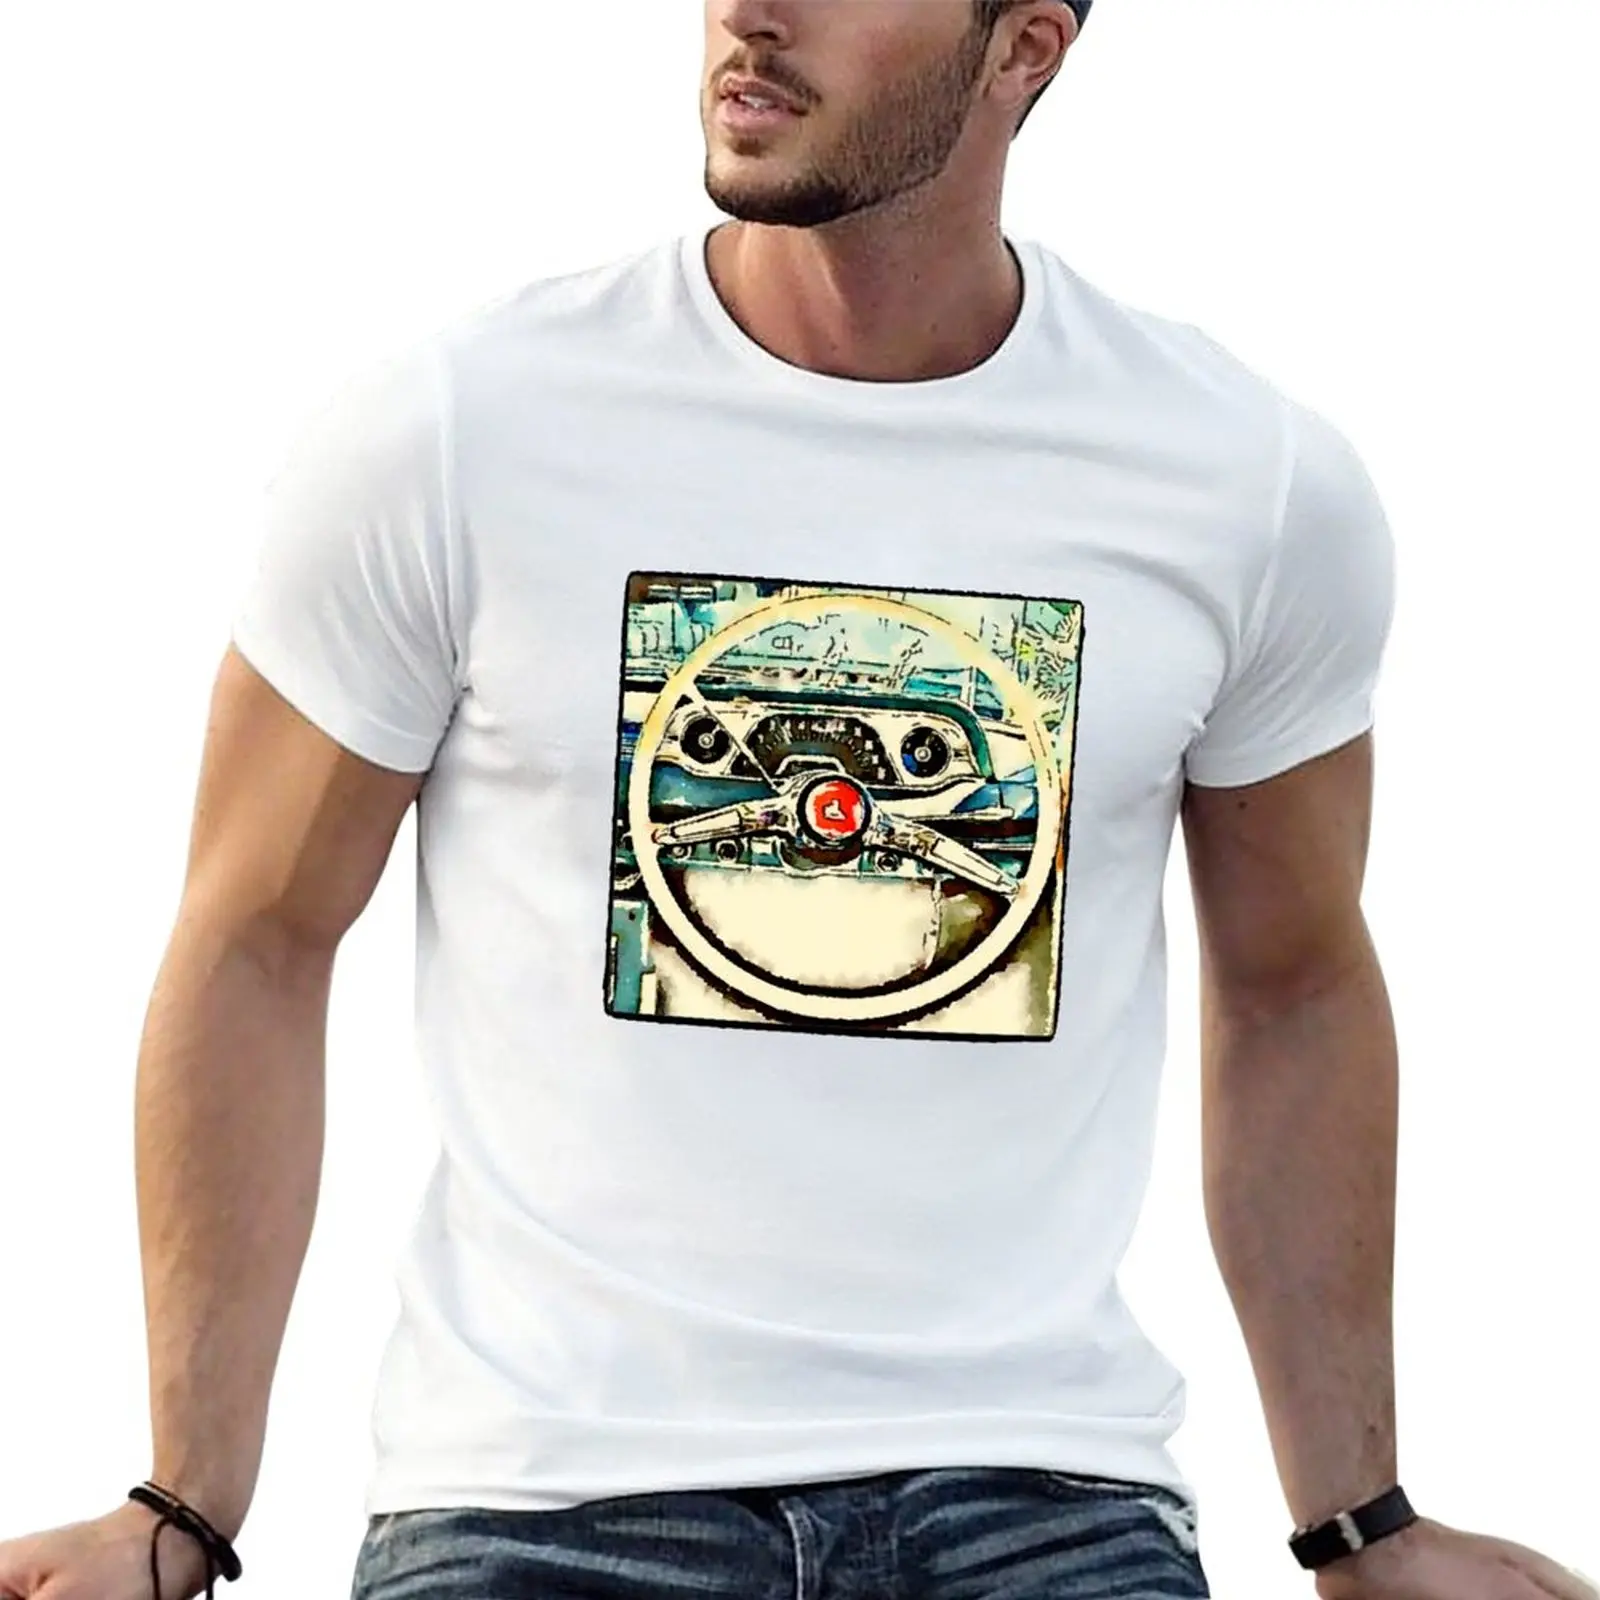 

New The EH Holden Dash T-Shirt blank t shirts Blouse cute tops mens graphic t-shirts funny